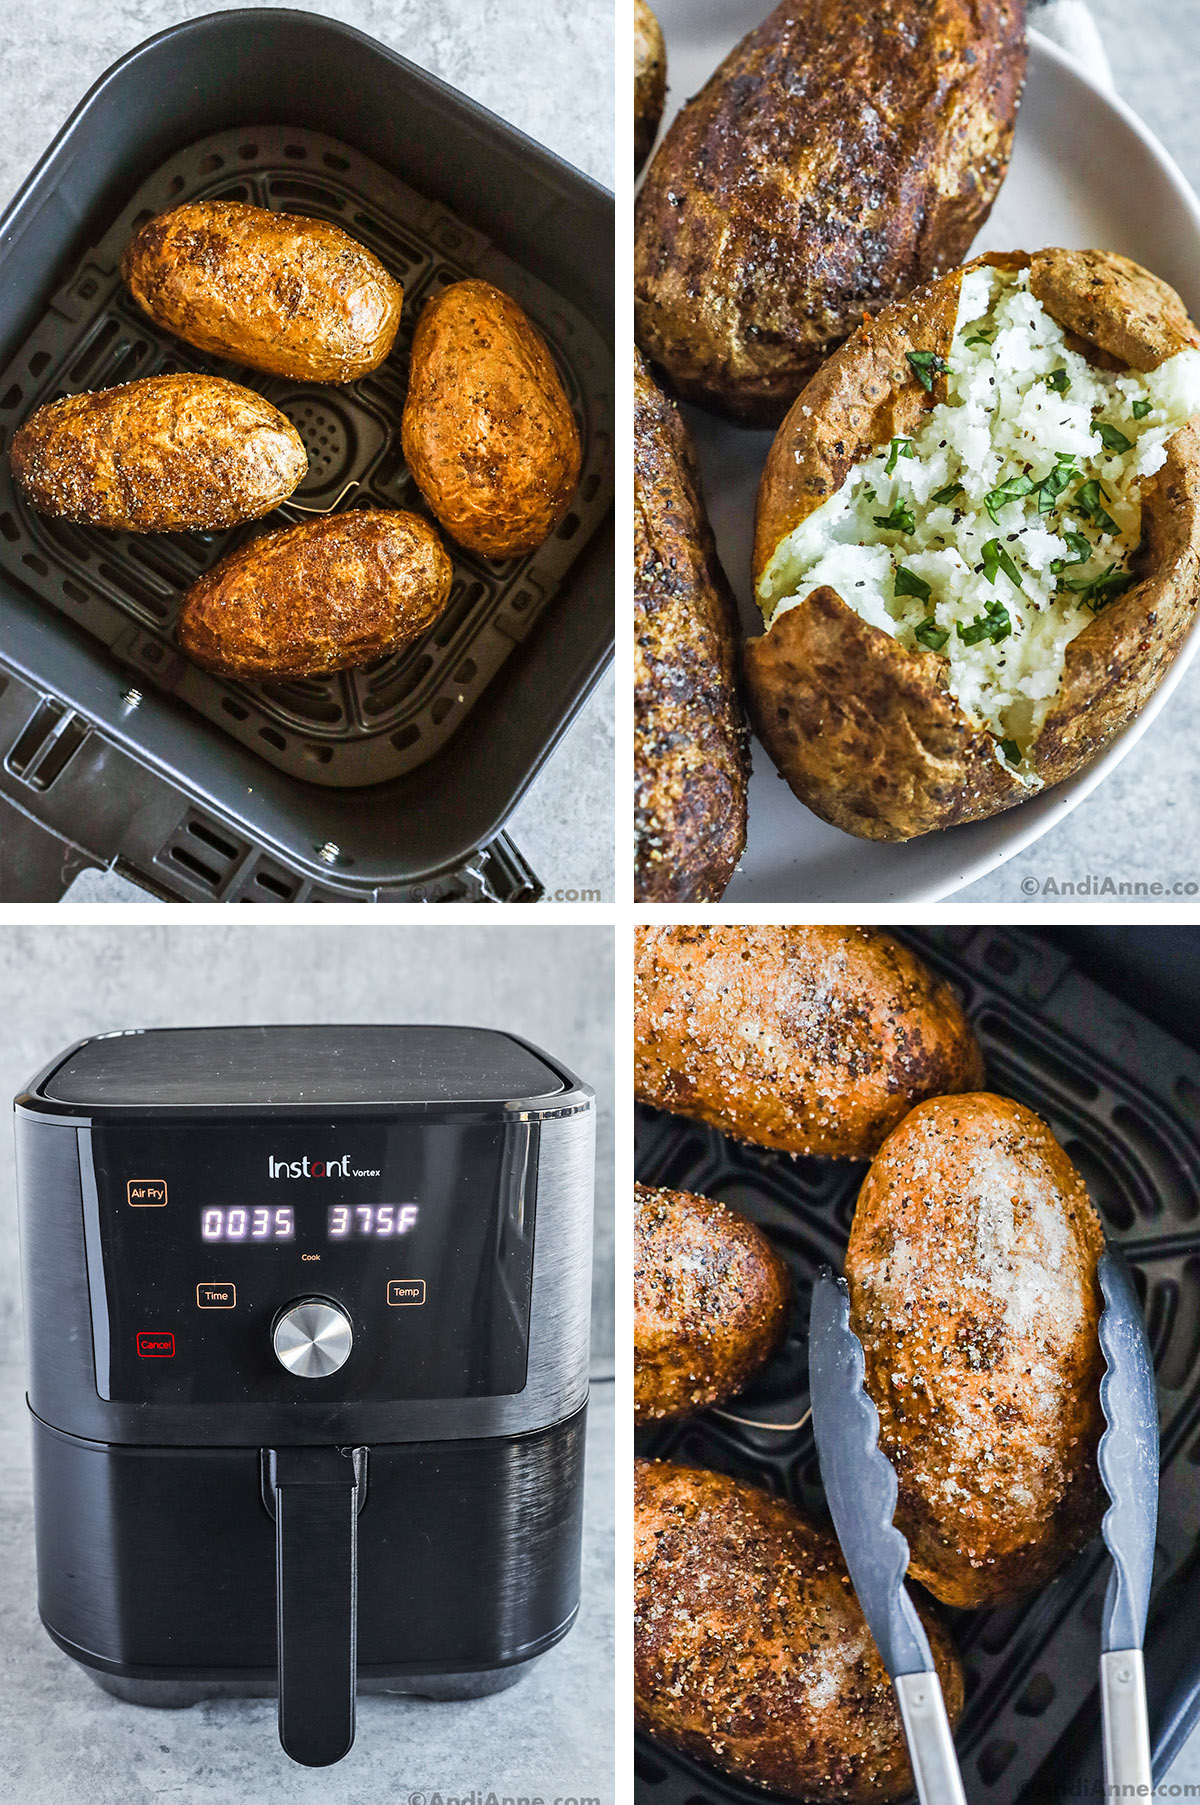 Air fryer basket with russet potatoes, close up of a baked potato cut open and topped with seasonings, an air fryer and tongs holding a russet potato in an air fryer basket.